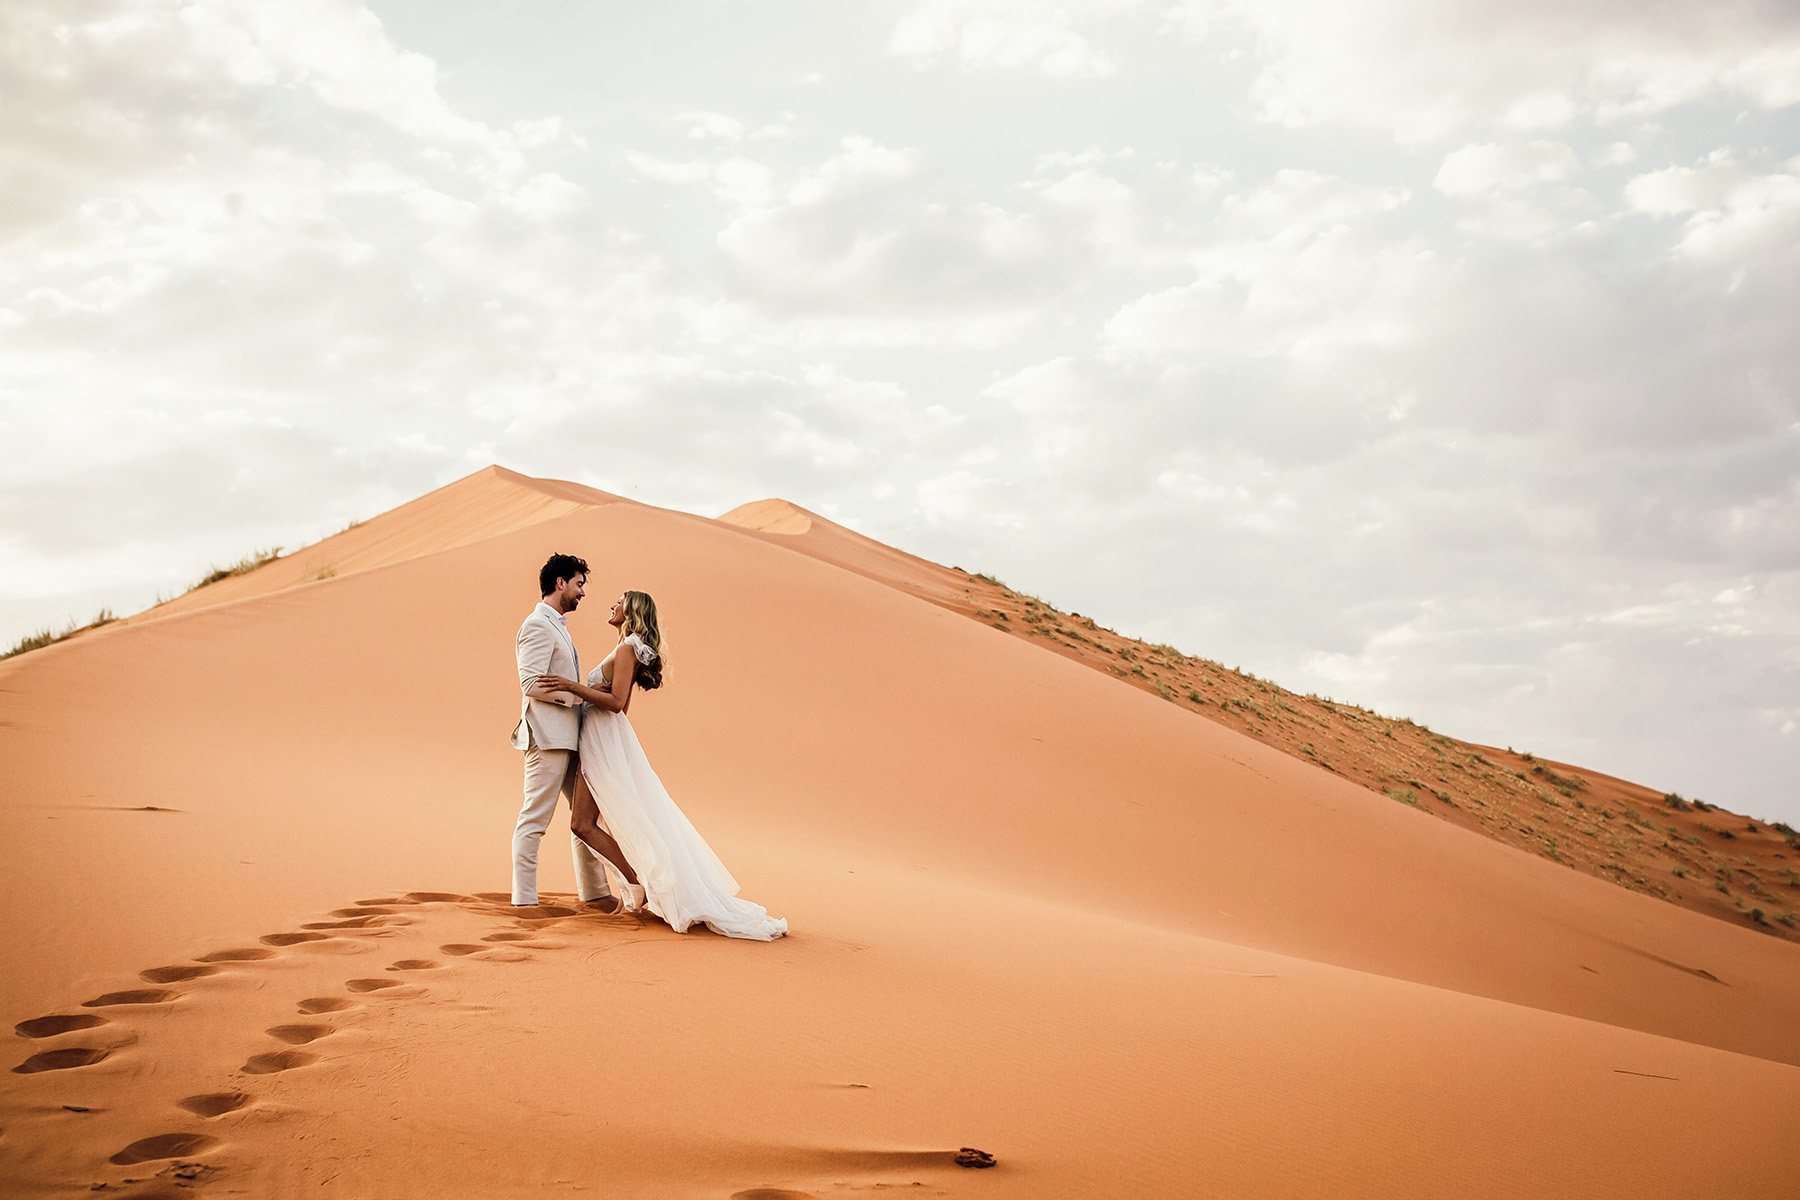 Namibia is one of the best places to elope in Africa.